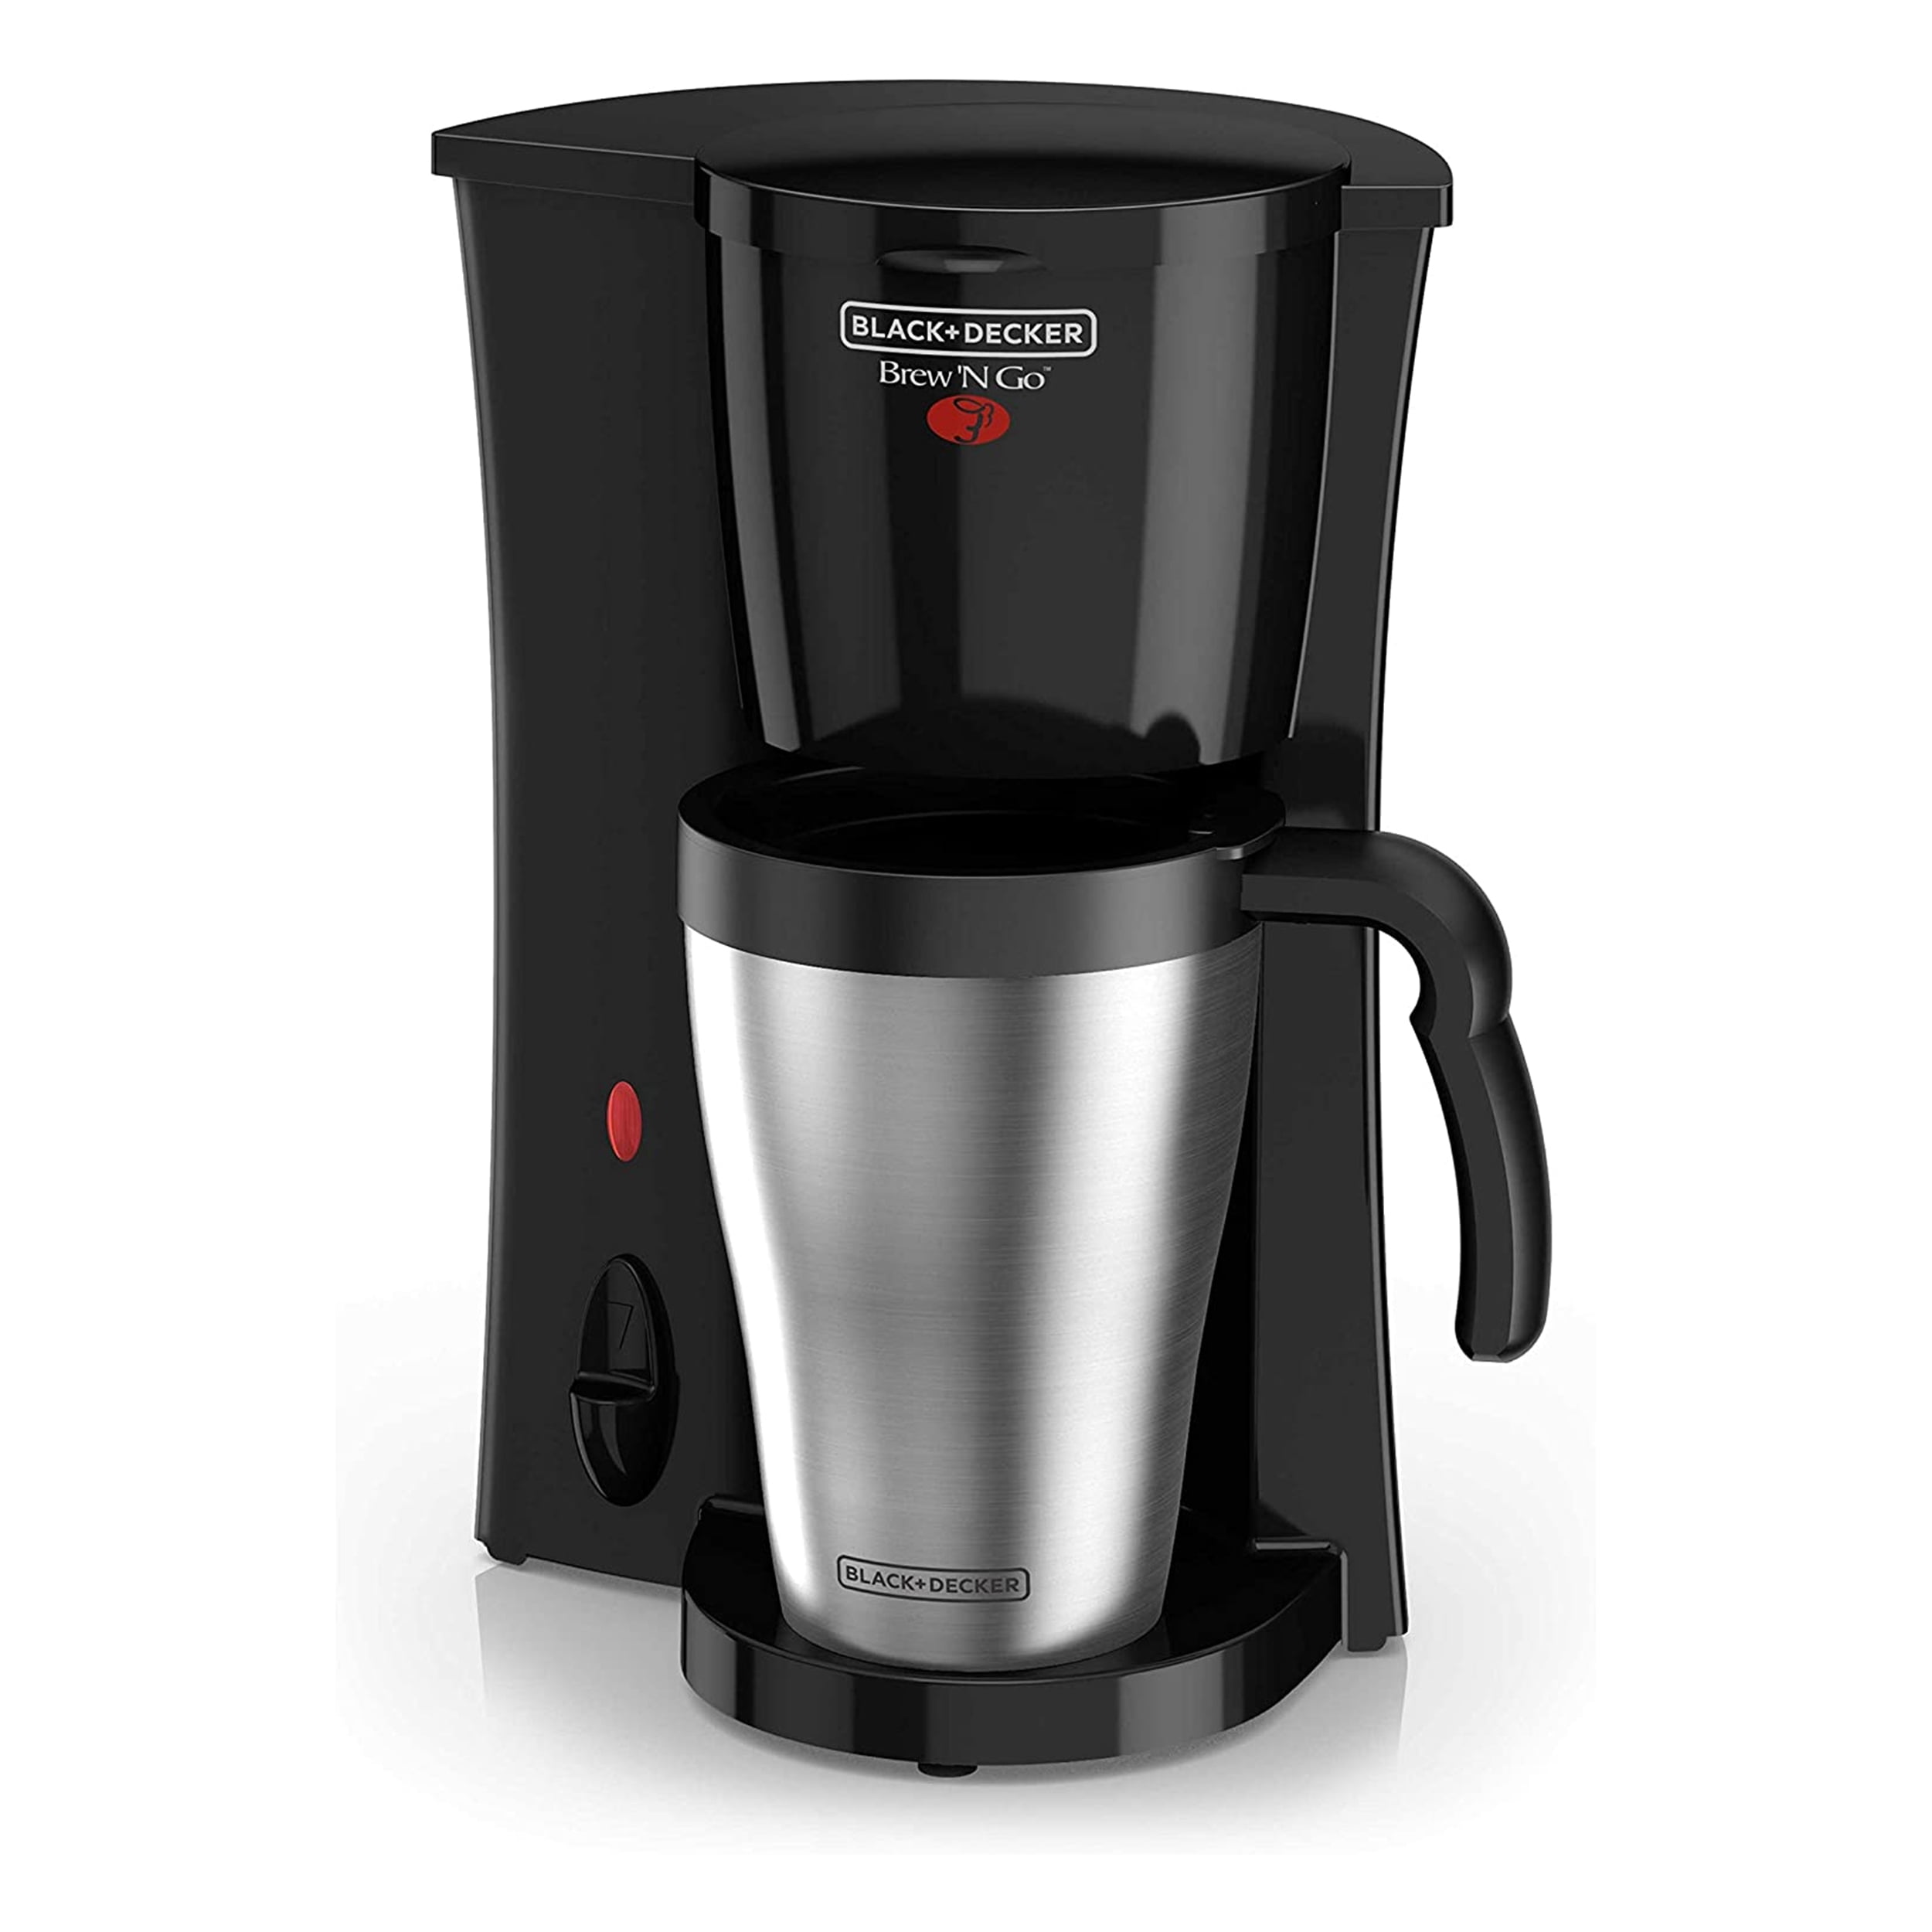 Black And Decker Brew 'n Go DCM18 Personal Coffee Maker Review  Watch the  9malls review of the Black And Decker Brew 'n Go DCM18 Personal Coffee Maker.  How did this fast